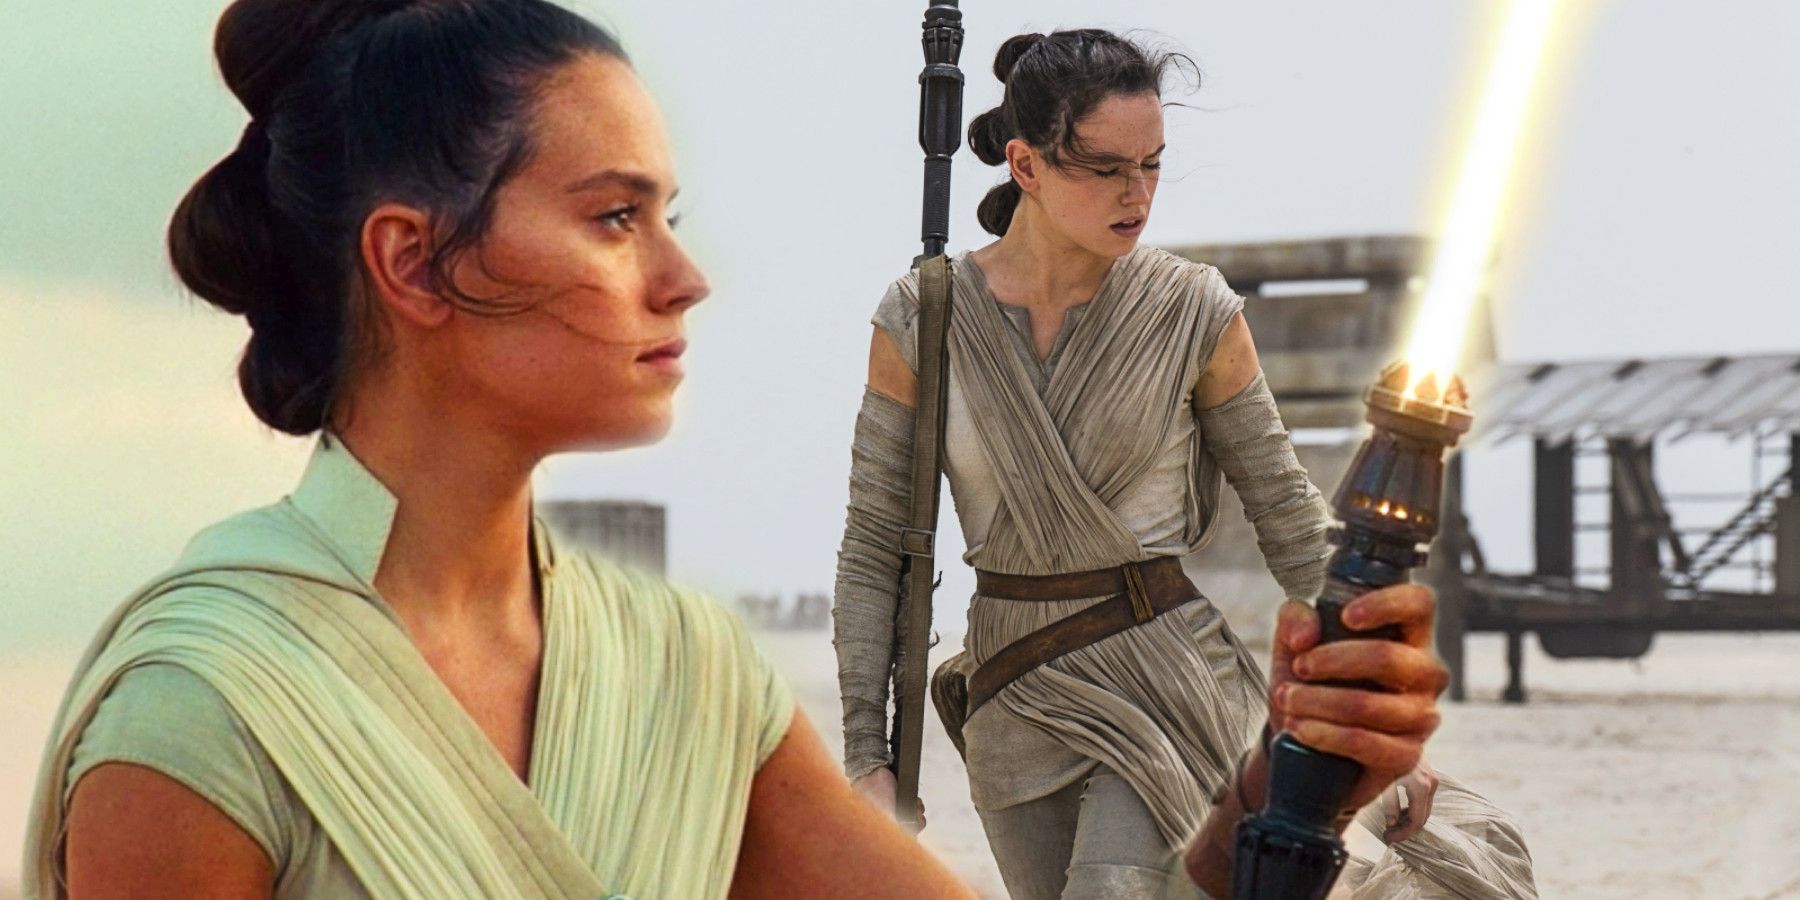 Rey in The Force Awakens and The Rise of Skywalker.